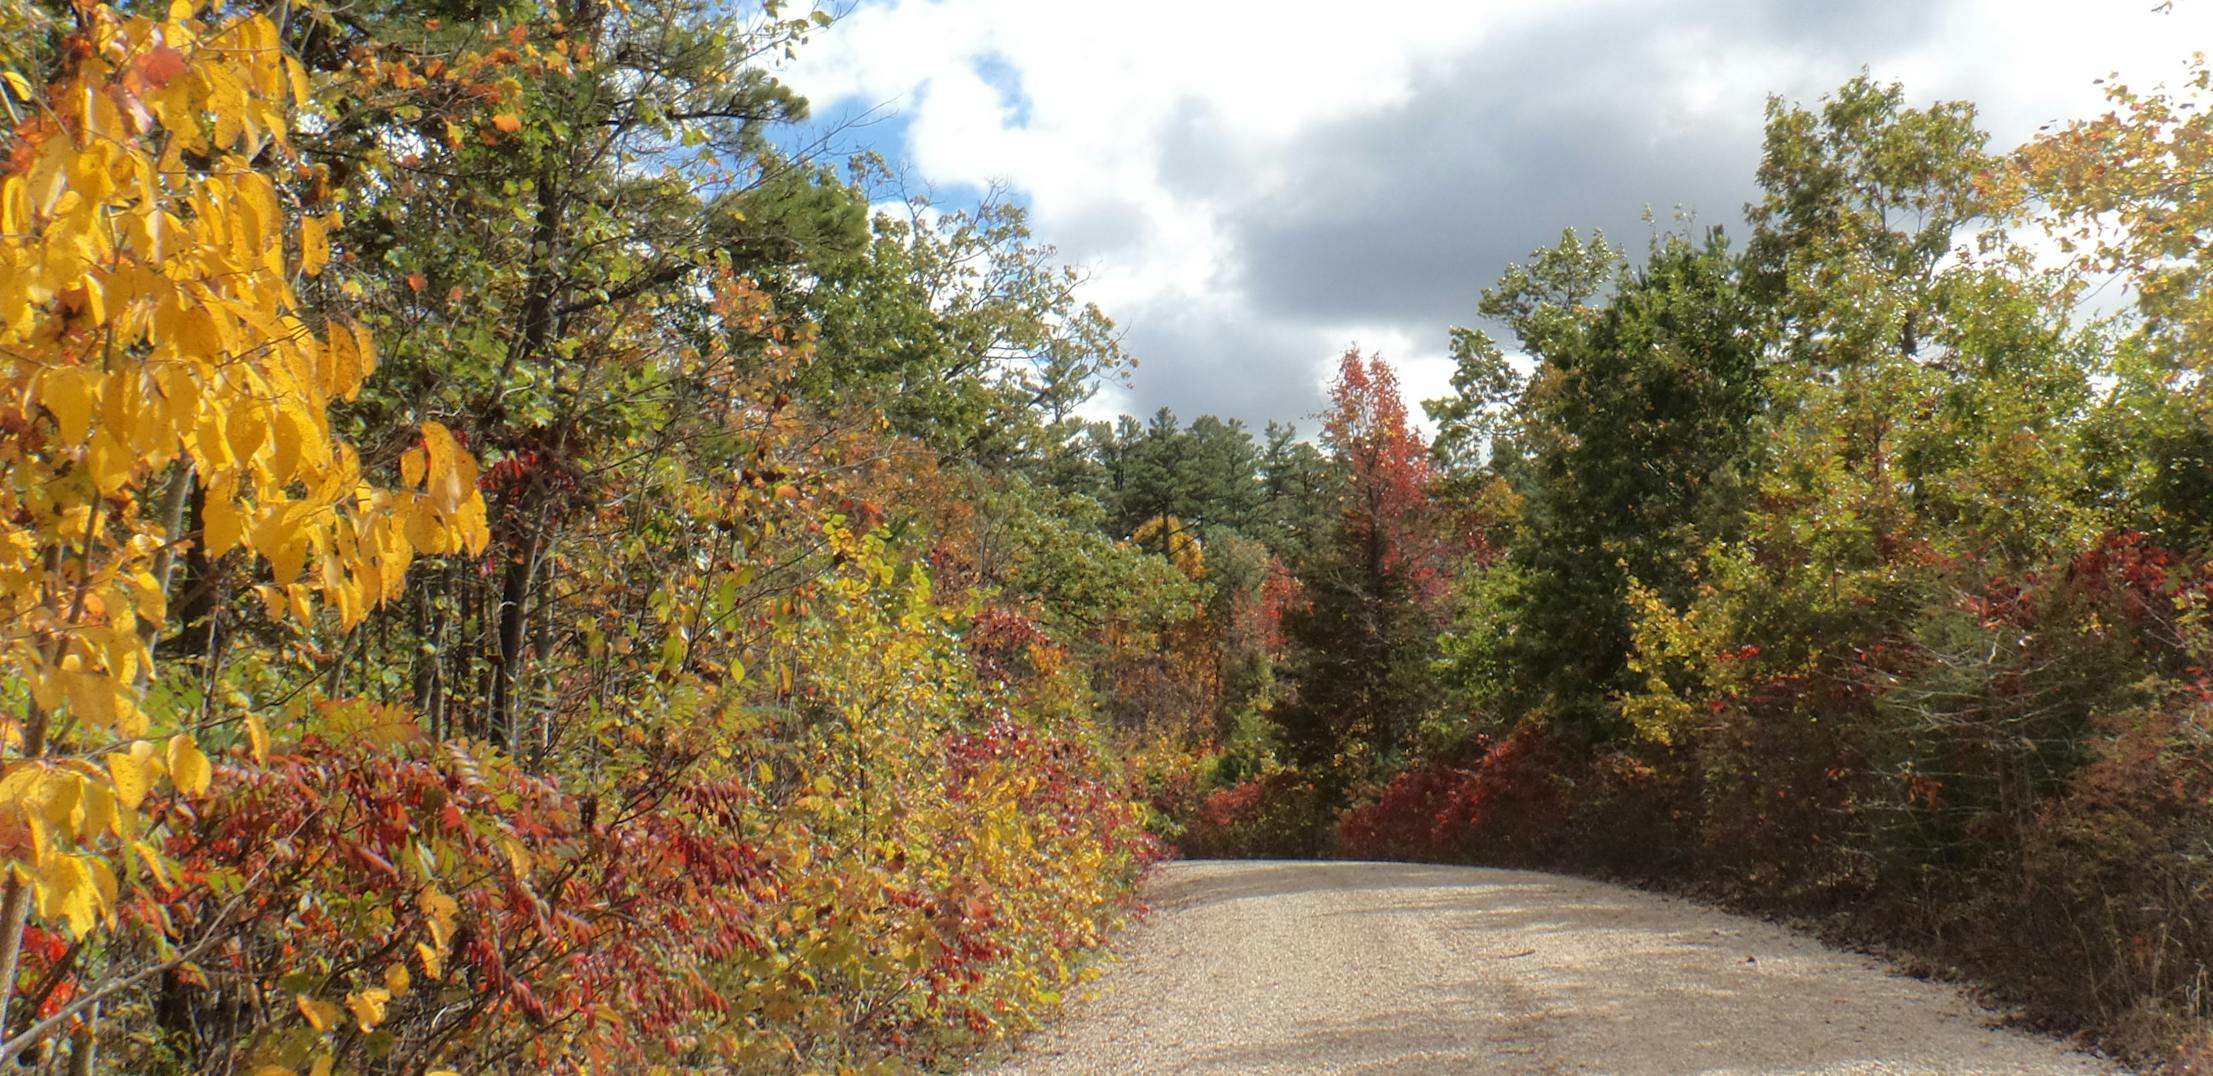 Buick Truck Trail (a dirt path) with fall foliage in Mark Twain National Forest.